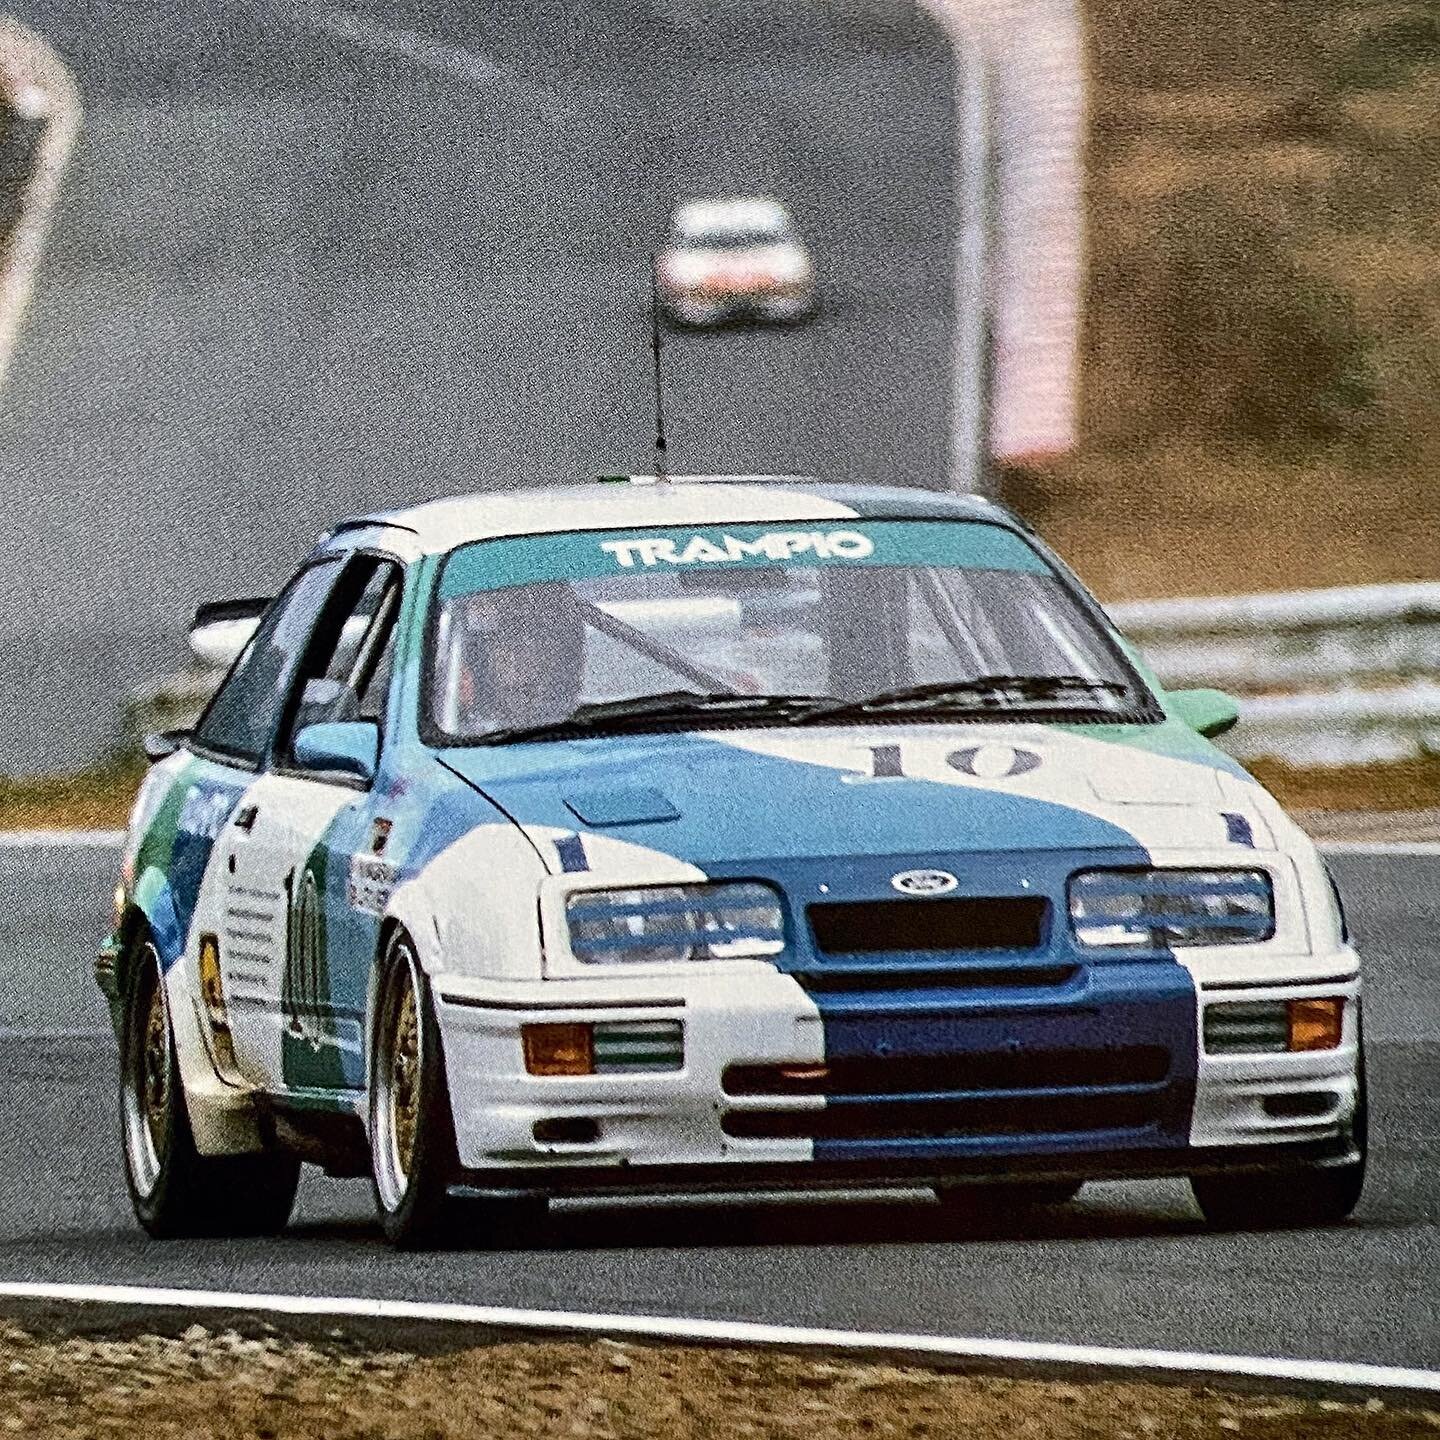 Andy Rouse with the Trampio Ford Sierra RS500 en route for P2 at the 1987 Fuji Inter-Tec 500.

📷 Auto Sport magazine 

#fordsierra #fordsierracosworth #fordsierrarscosworth #fordsierrars500 #fordsierrars500cosworth #sierrarscosworth #sierrars500 #si